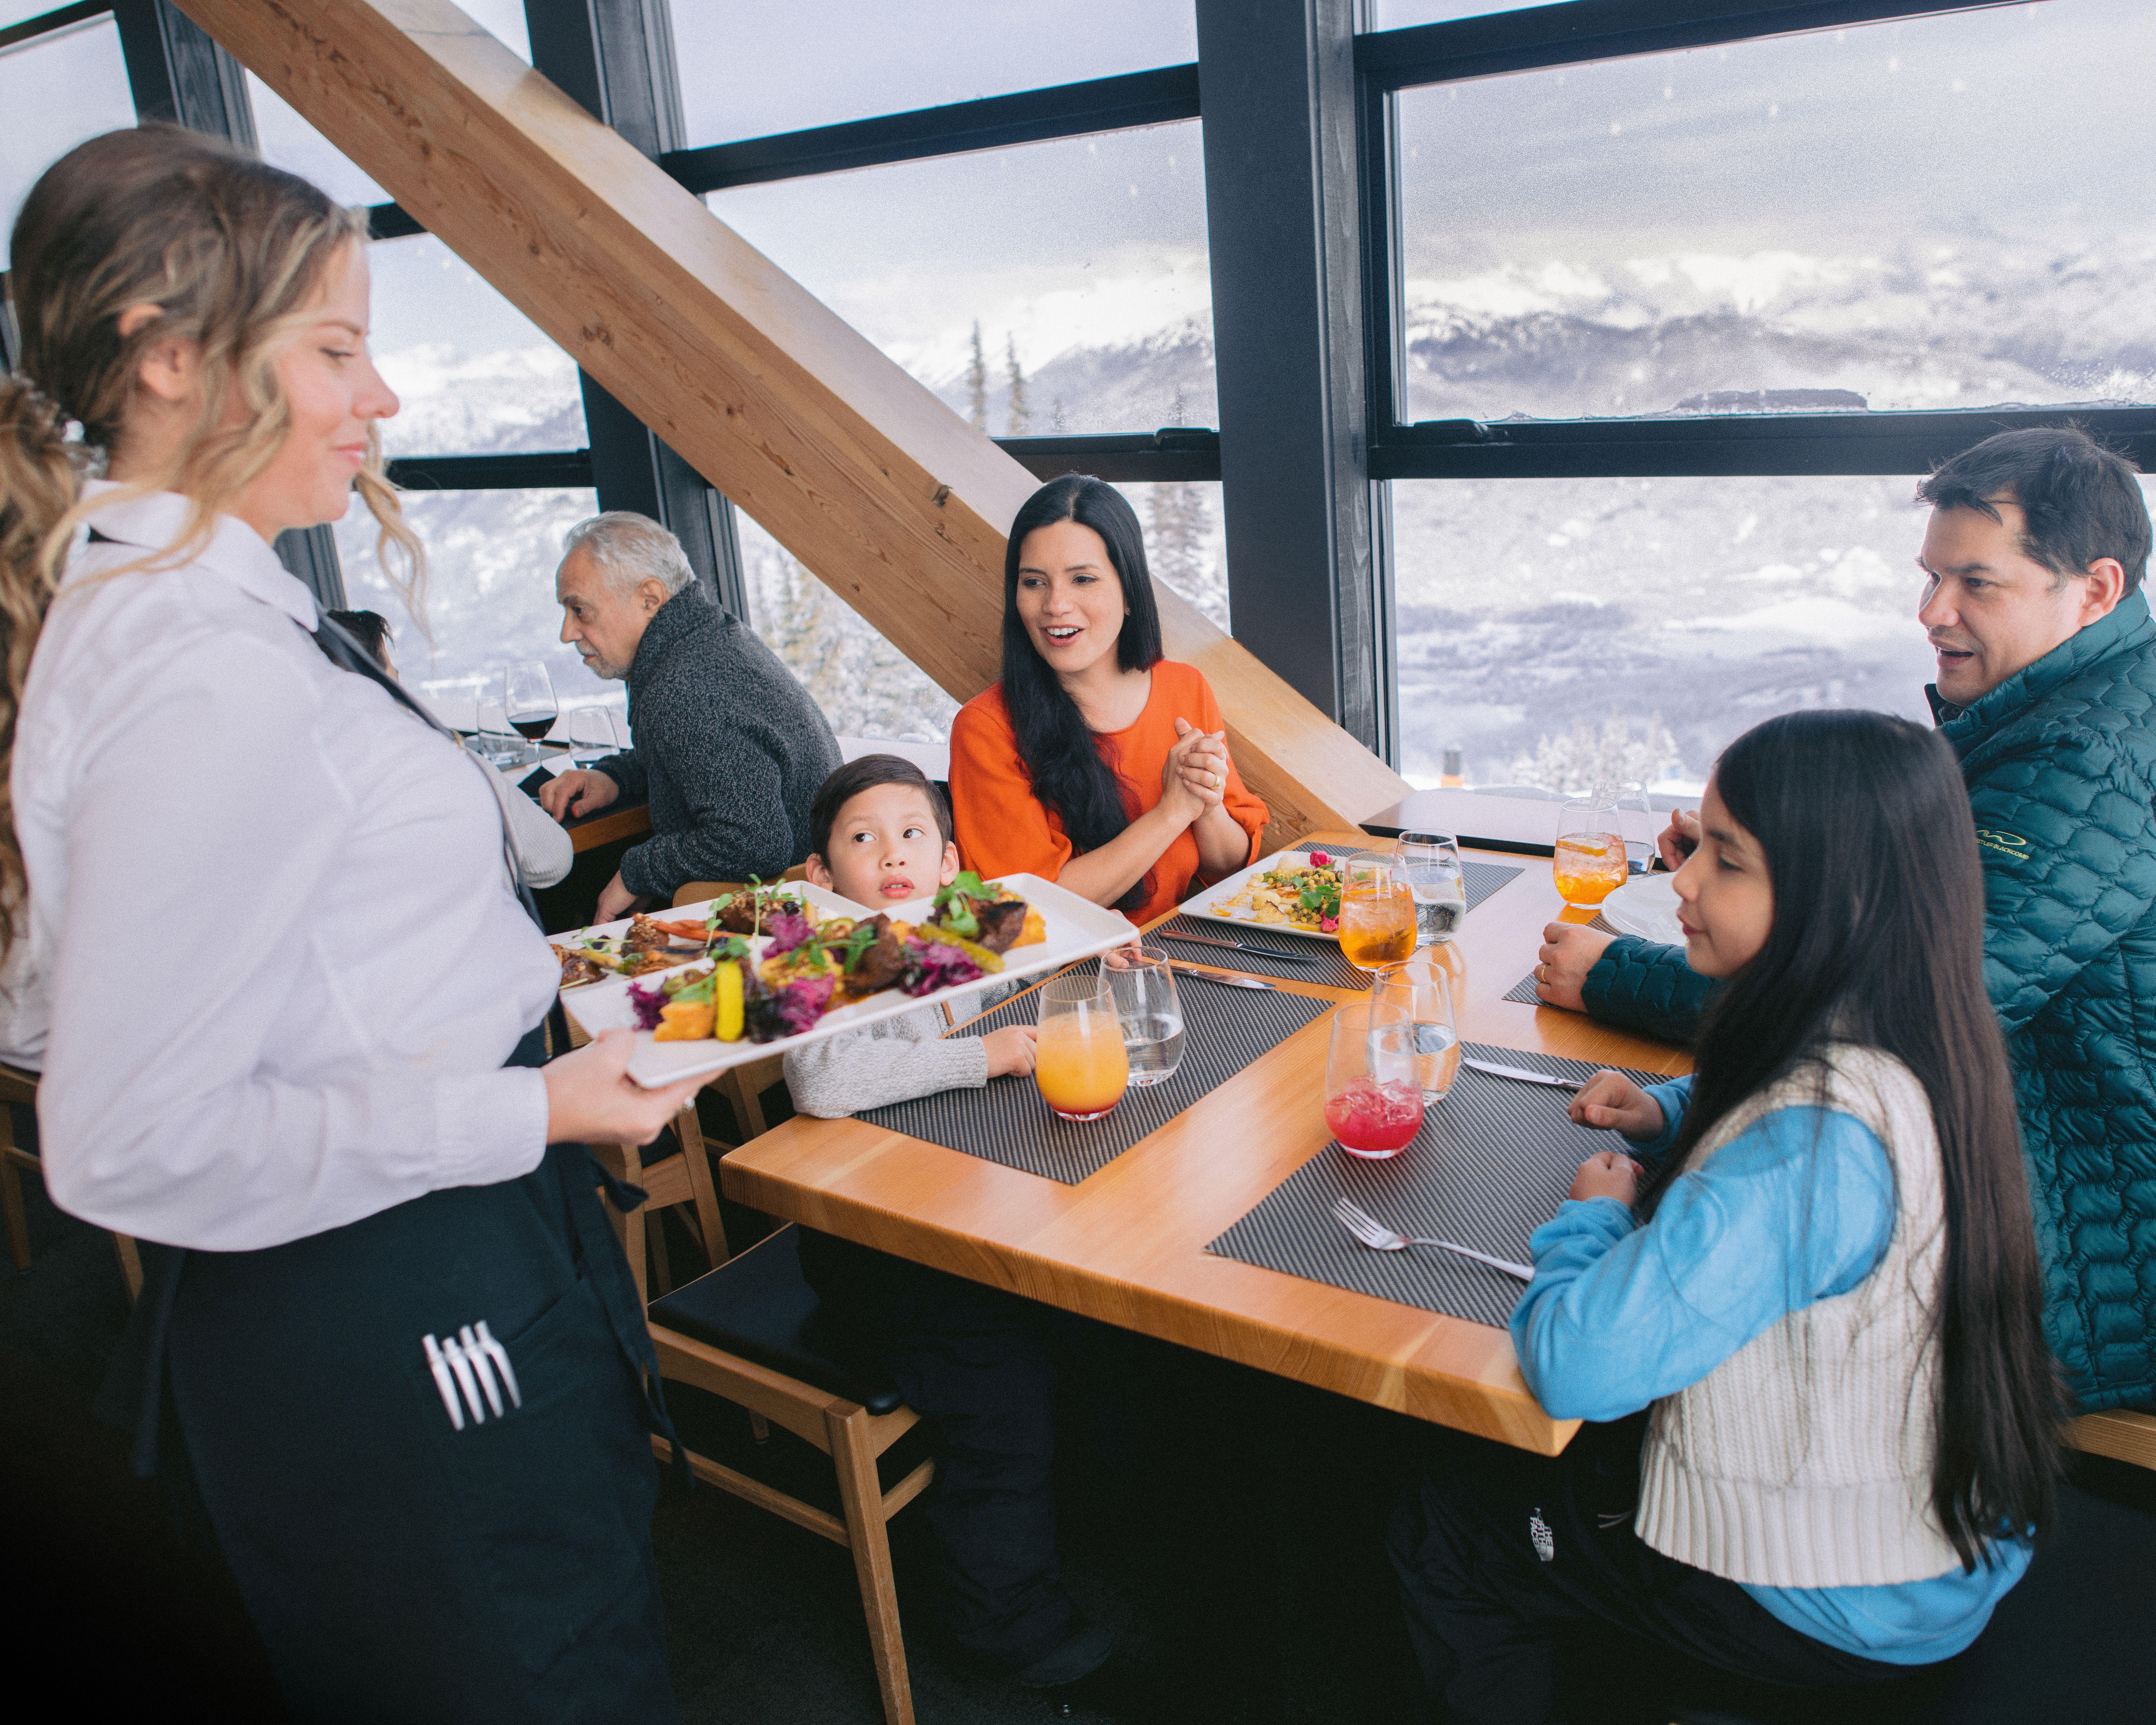 Whistler Skiing Vacations: A family being served lunch at the top of a mountain.